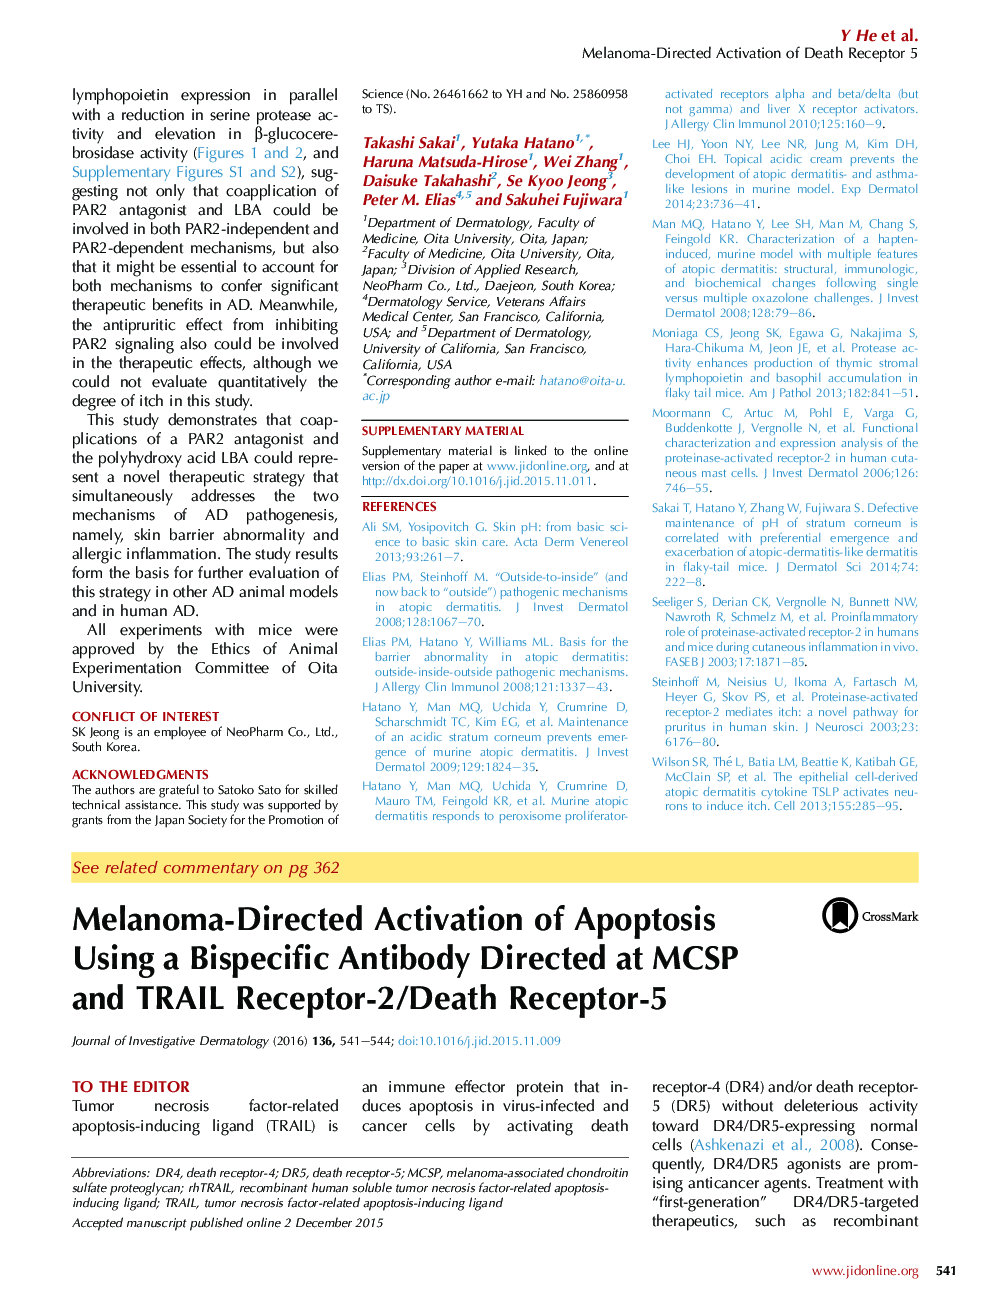 Melanoma-Directed Activation of Apoptosis Using a Bispecific Antibody Directed at MCSP and TRAIL Receptor-2/Death Receptor-5